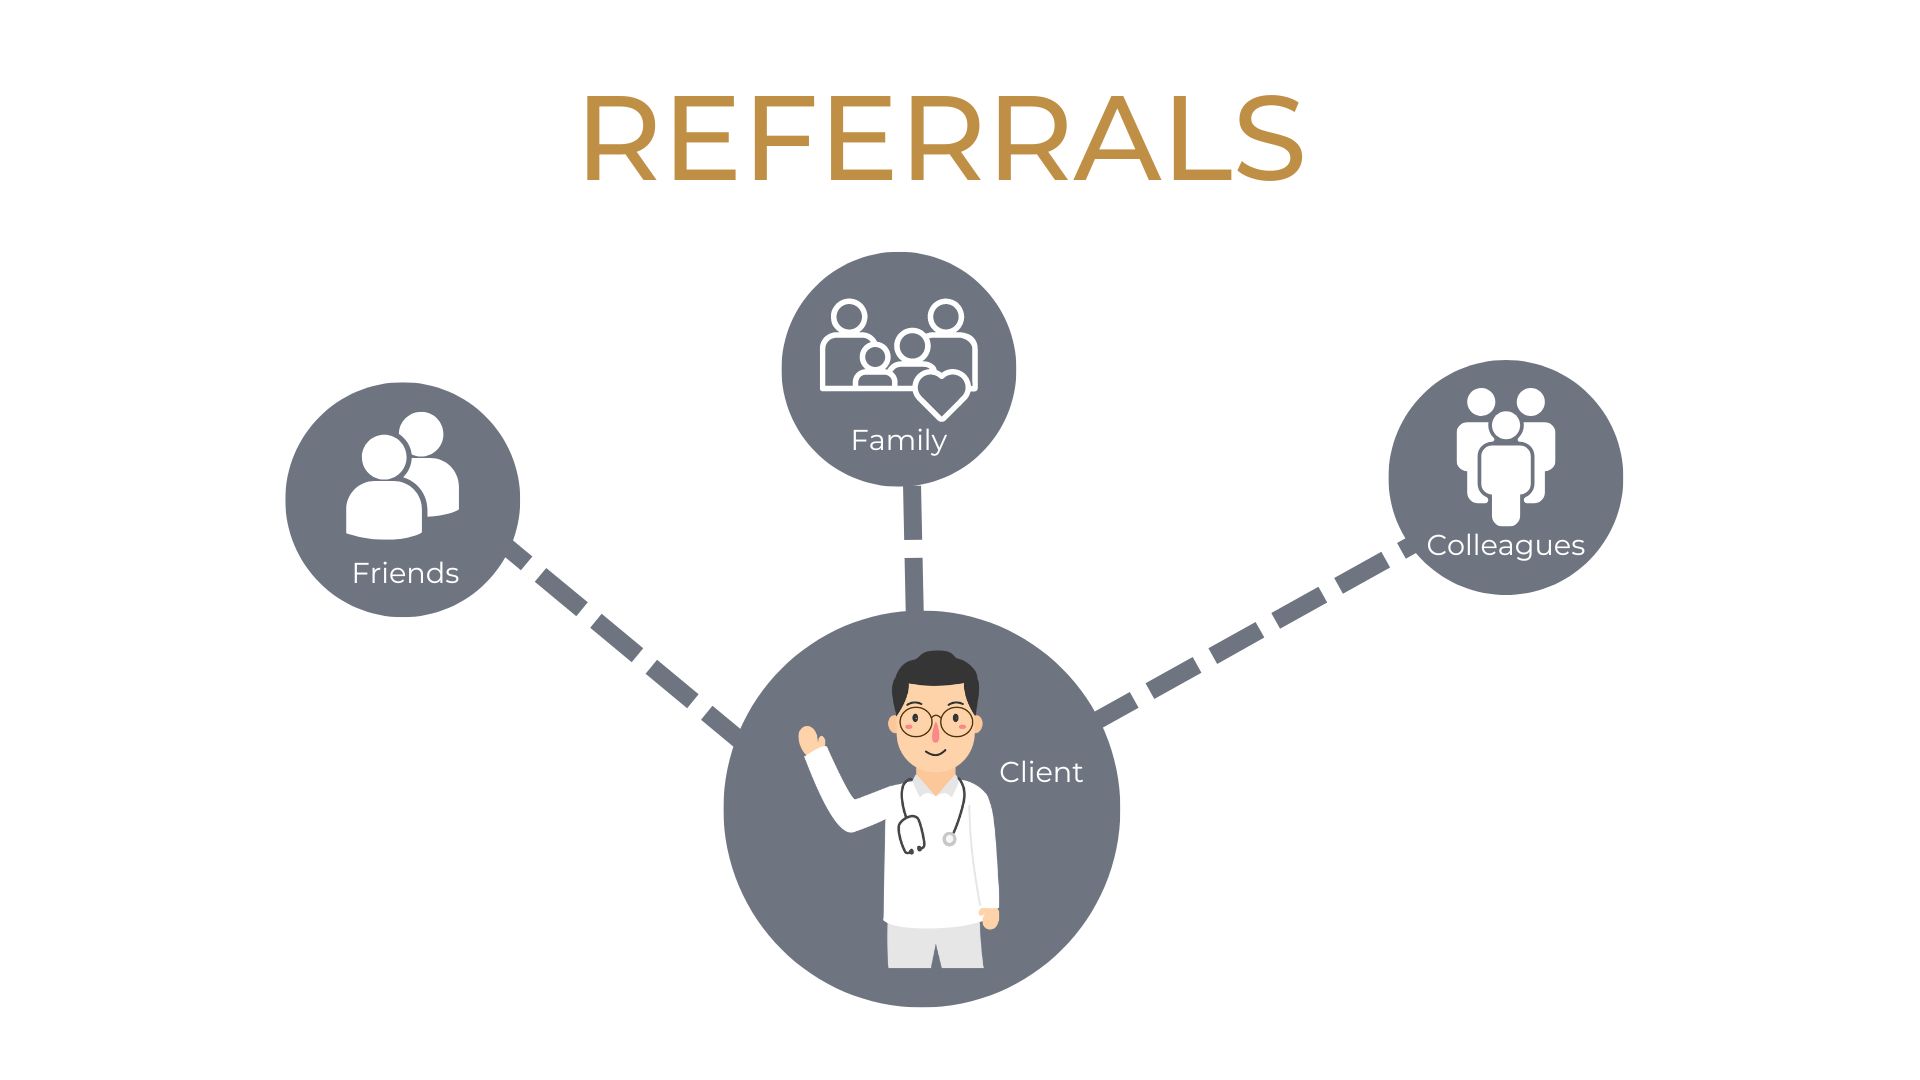 An Alternate Way  to Ask for Referrals